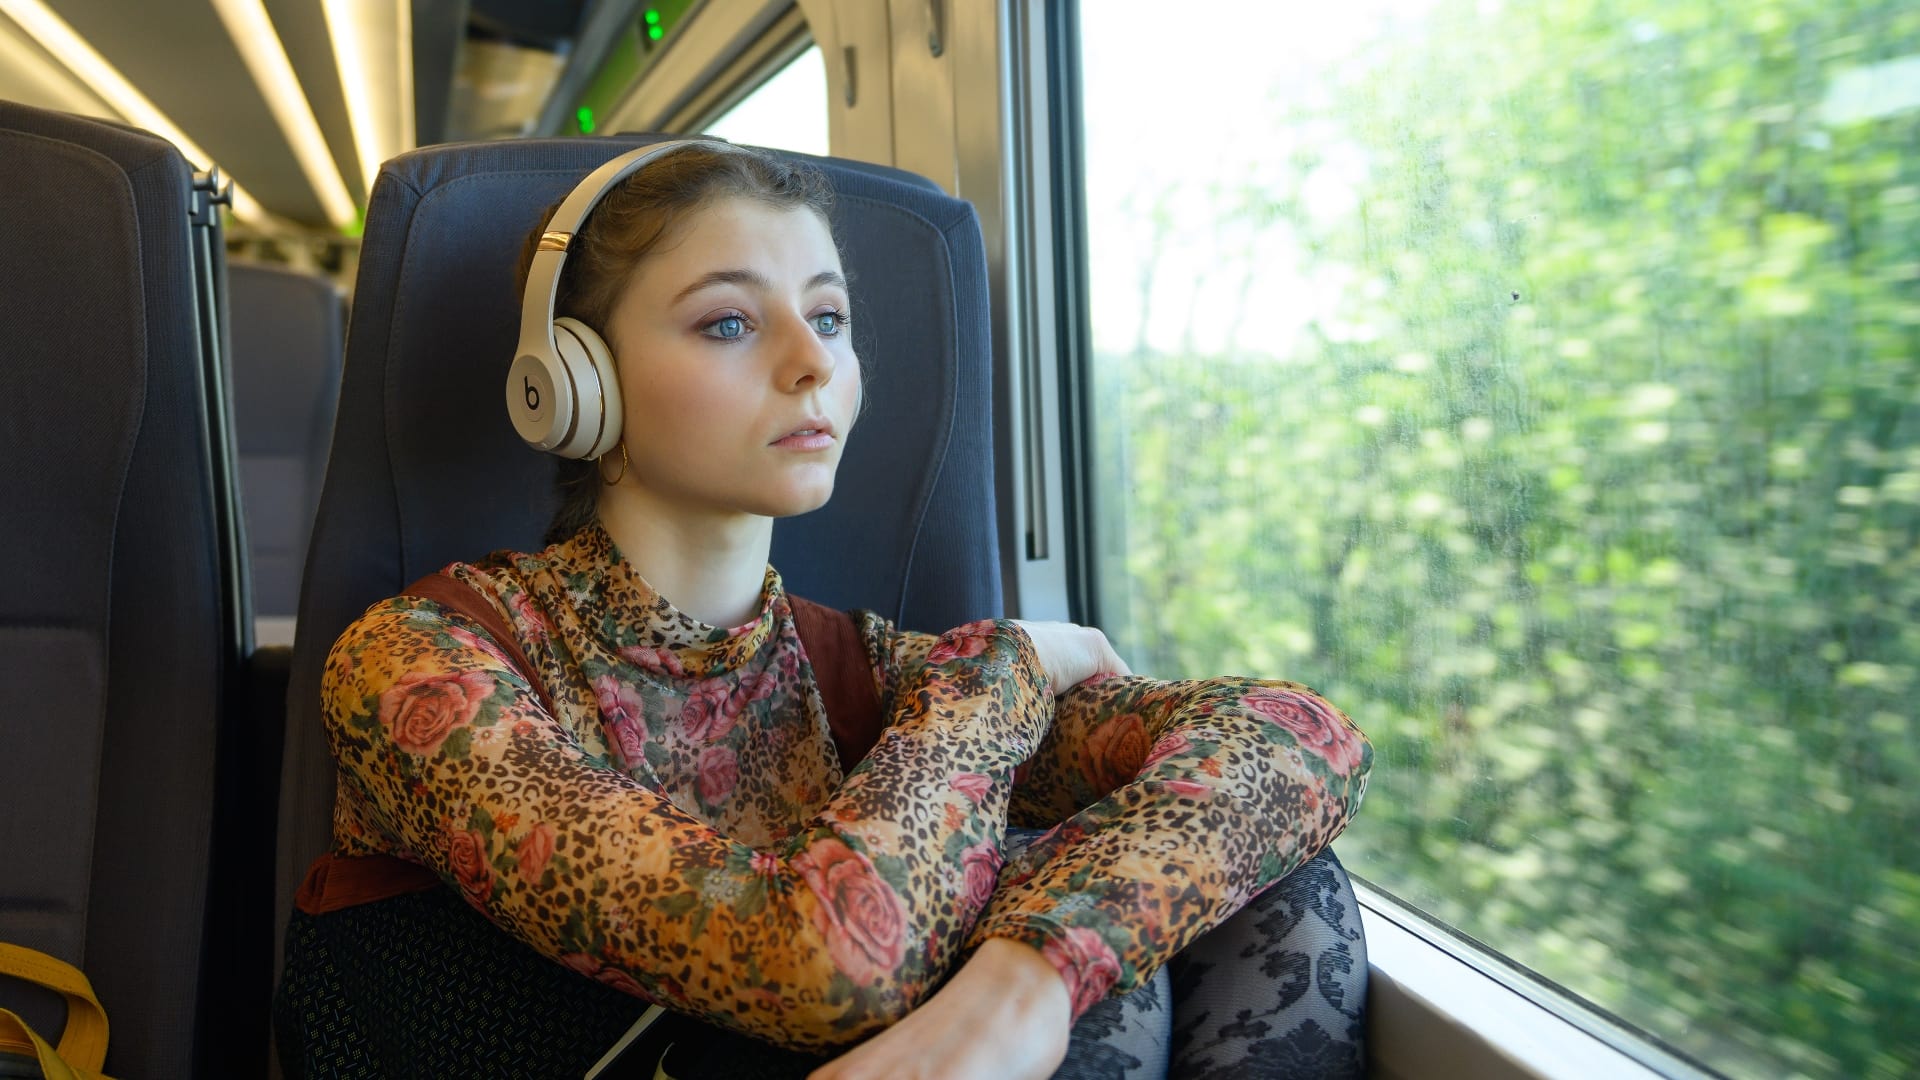 Last Night in Soho’s protagonist Ellie (Thomasin McKenzie) heads to the big city for the first time